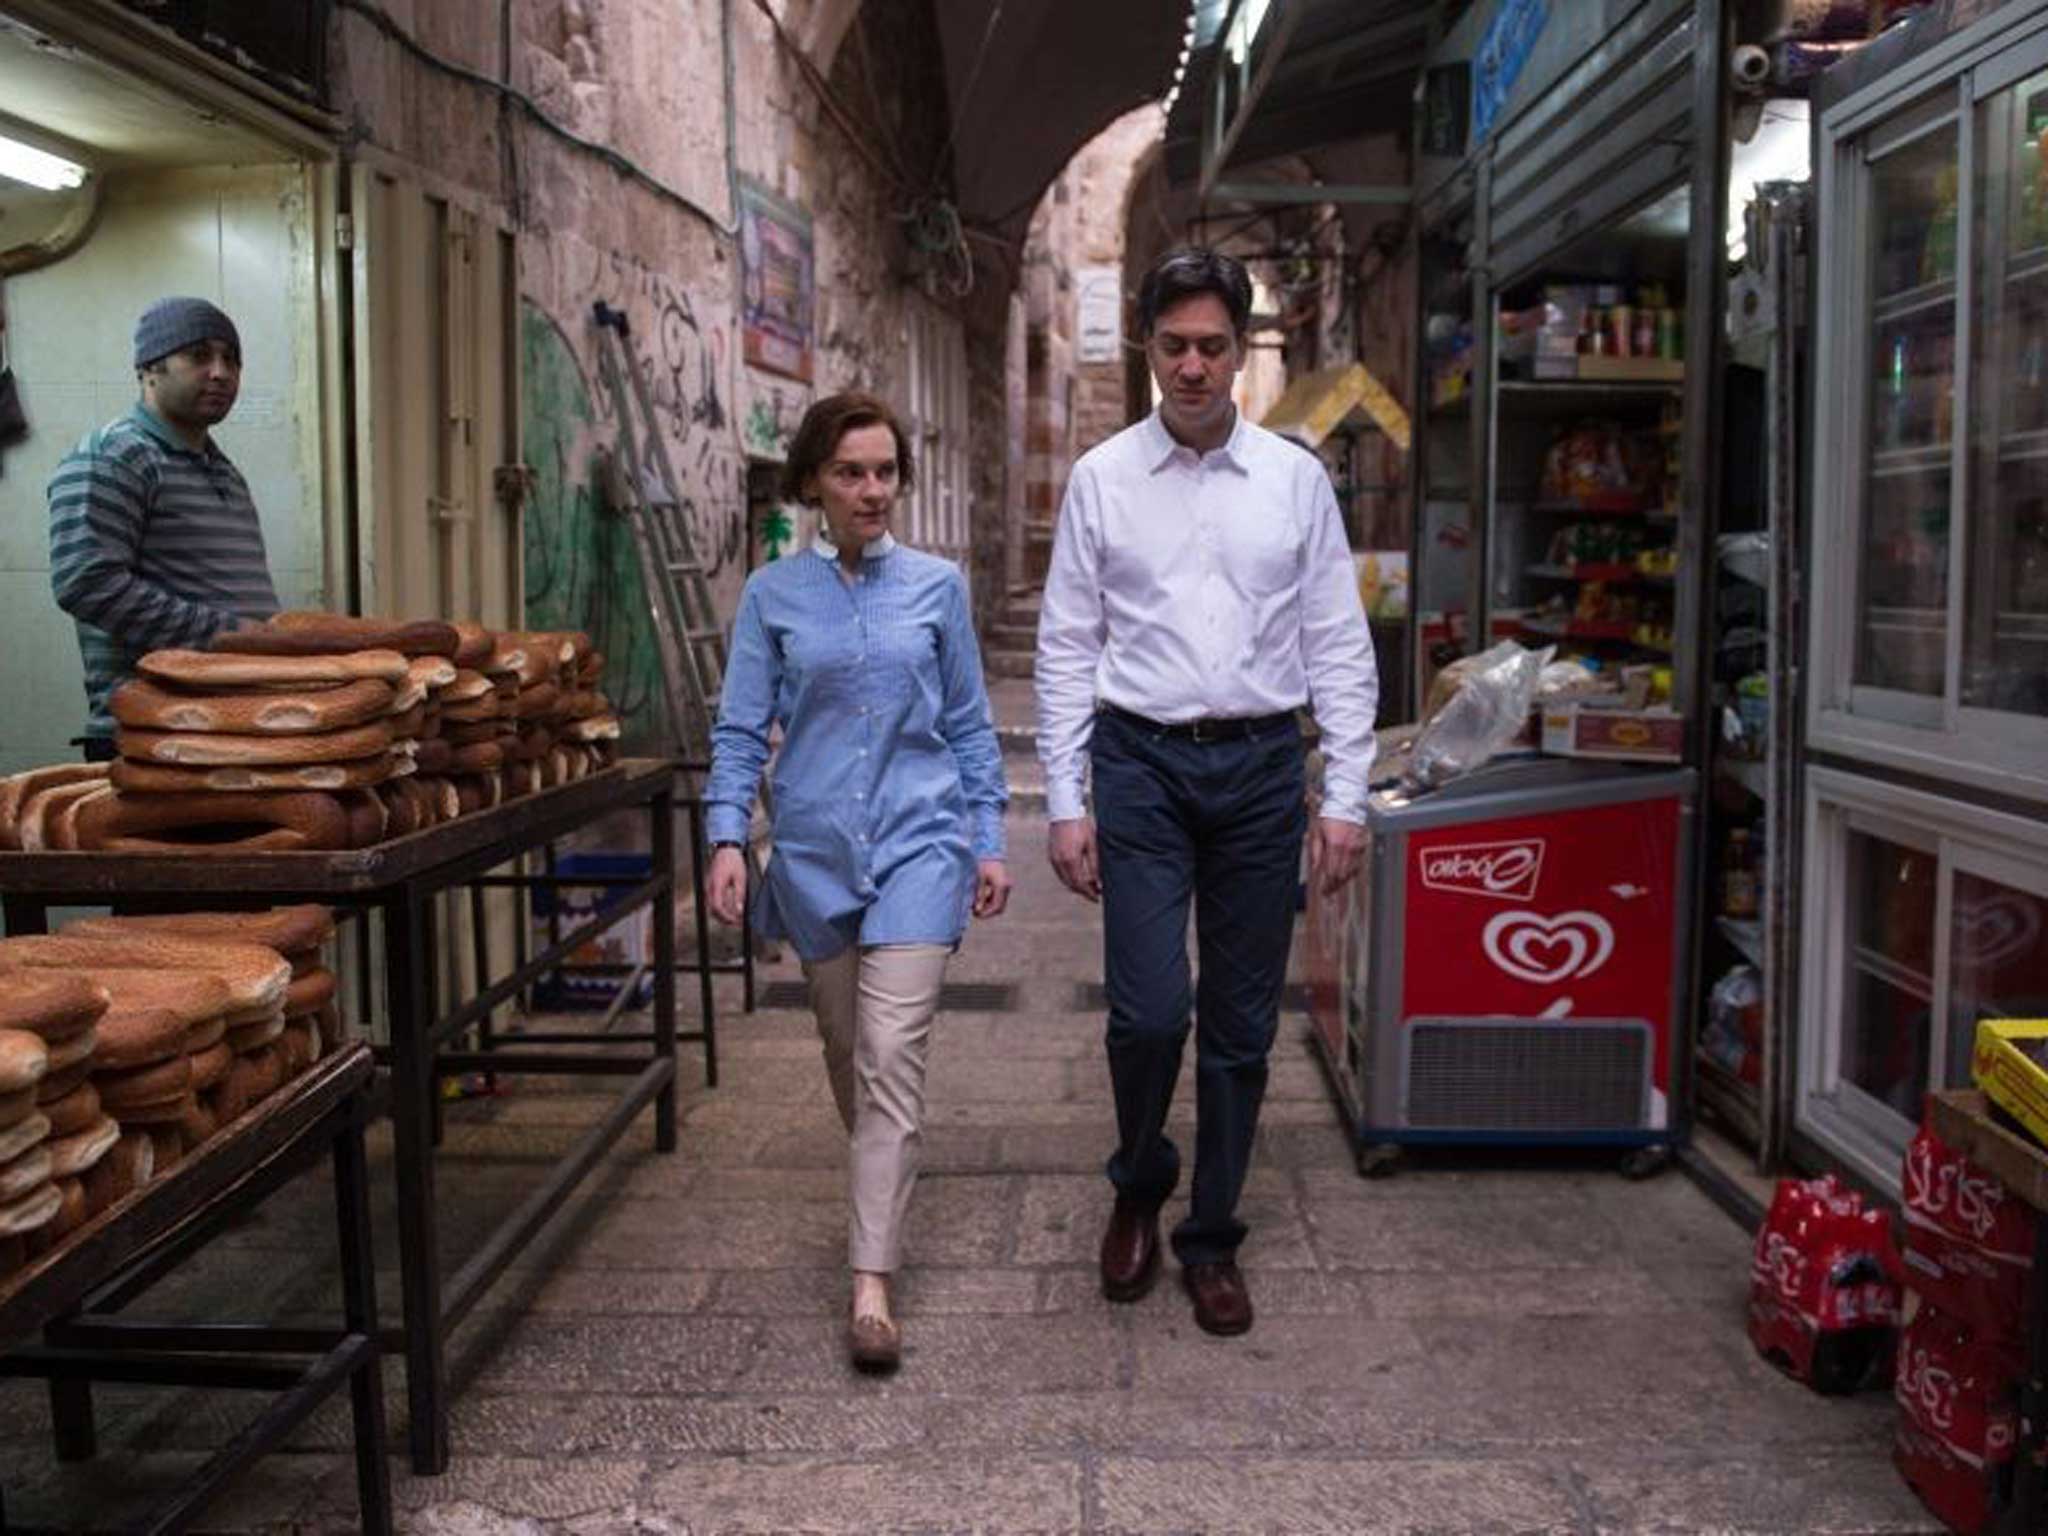 Ed Miliband and his wife in Jerusalem